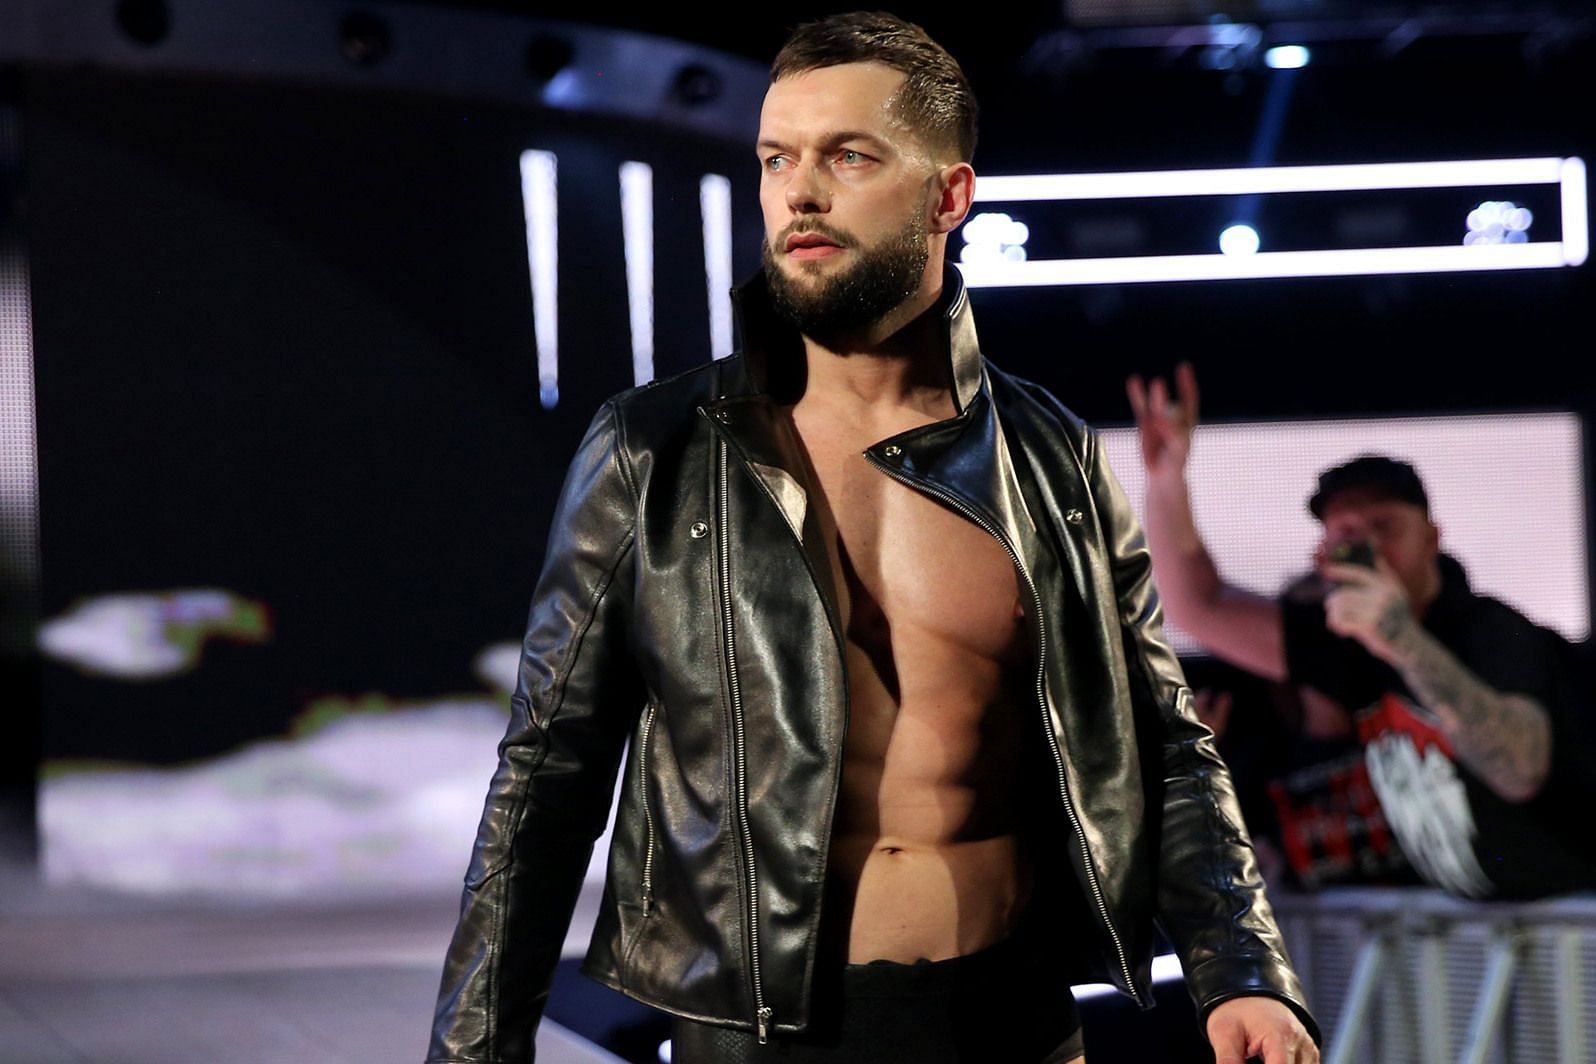 Finn Balor was in action on RAW this week